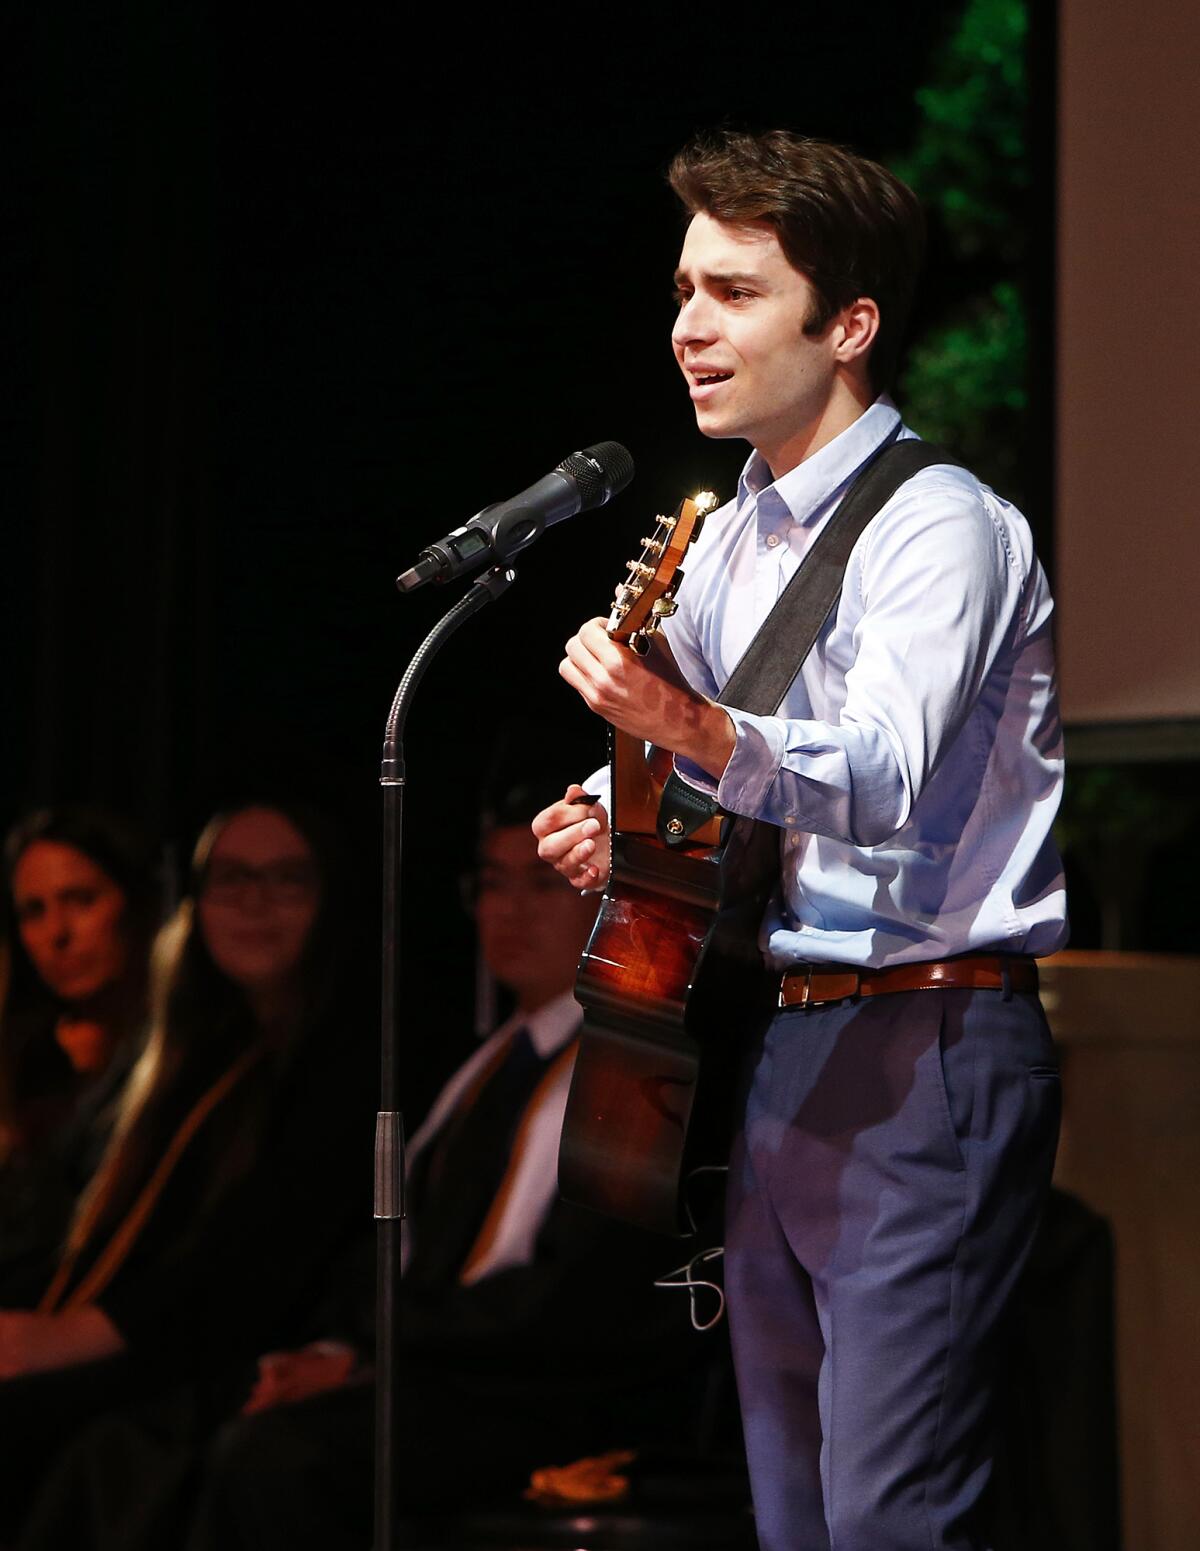 Senior Jackson Penney performs a song during Early College High School's graduation ceremony, June 2, 2022 in Costa Mesa.